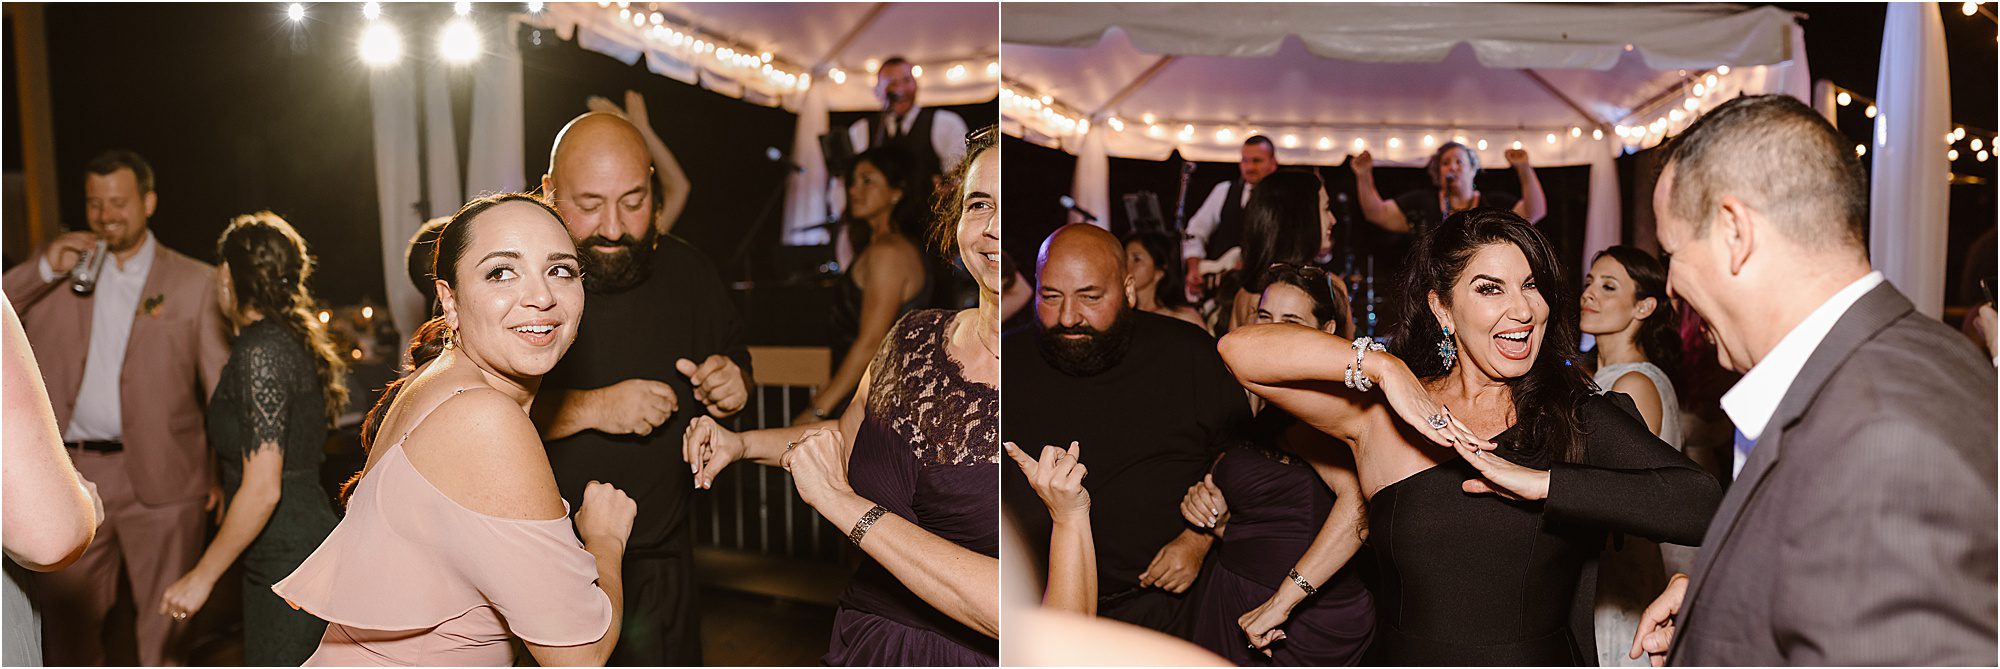 wedding guests dance on dance floor at wedding reception with live band